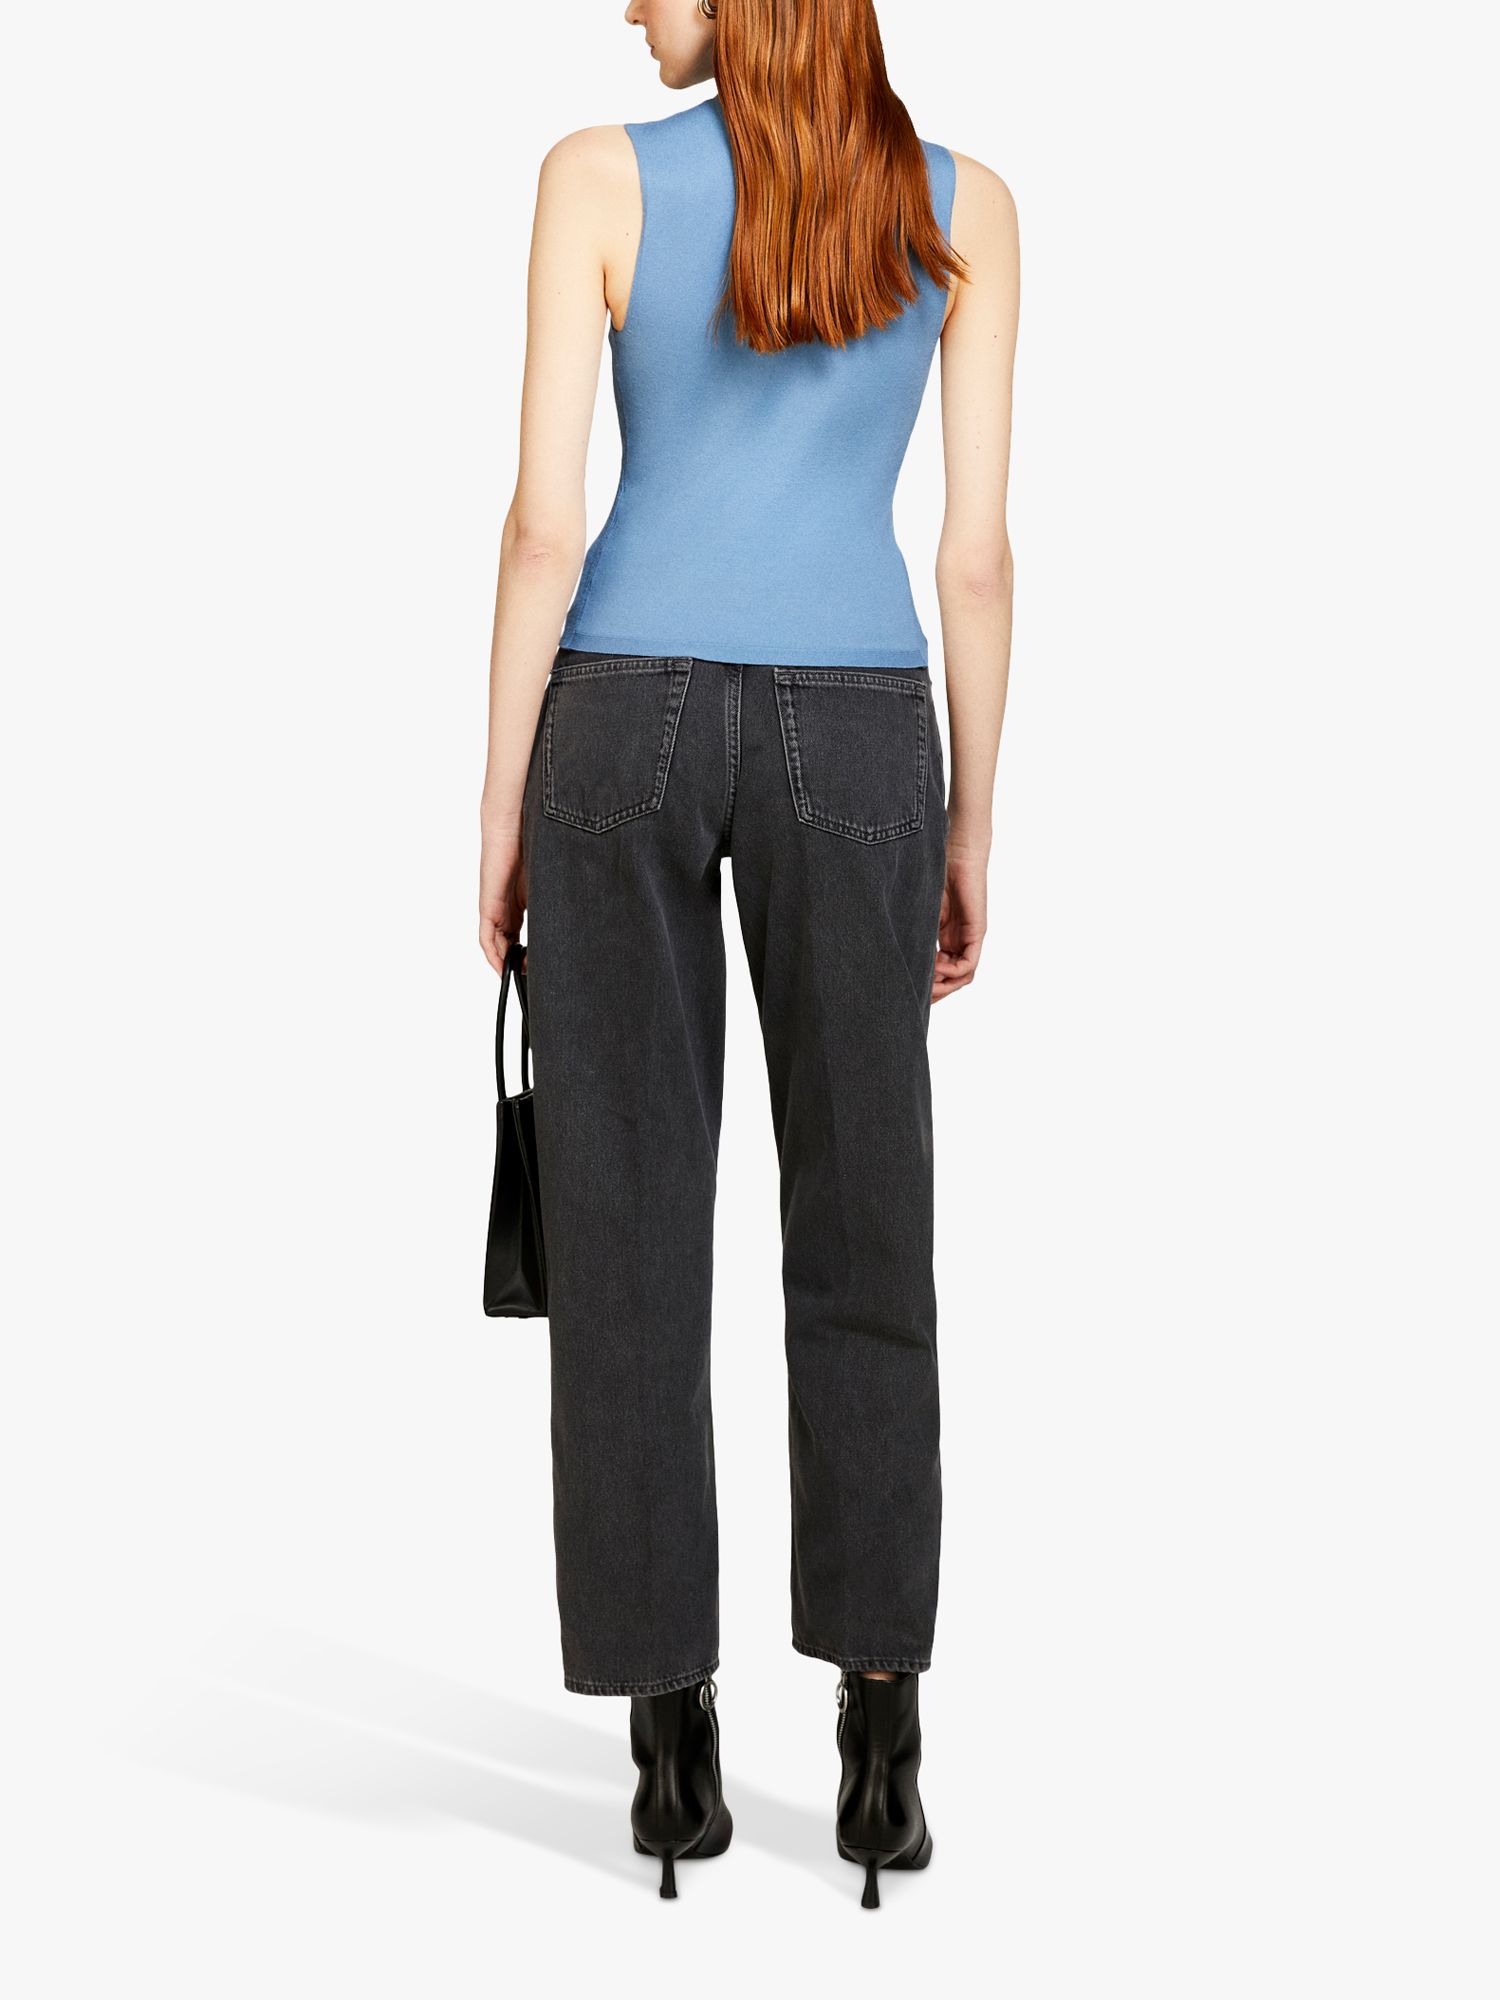 Buy SISLEY High Neck Knitted Sleeveless Top Online at johnlewis.com